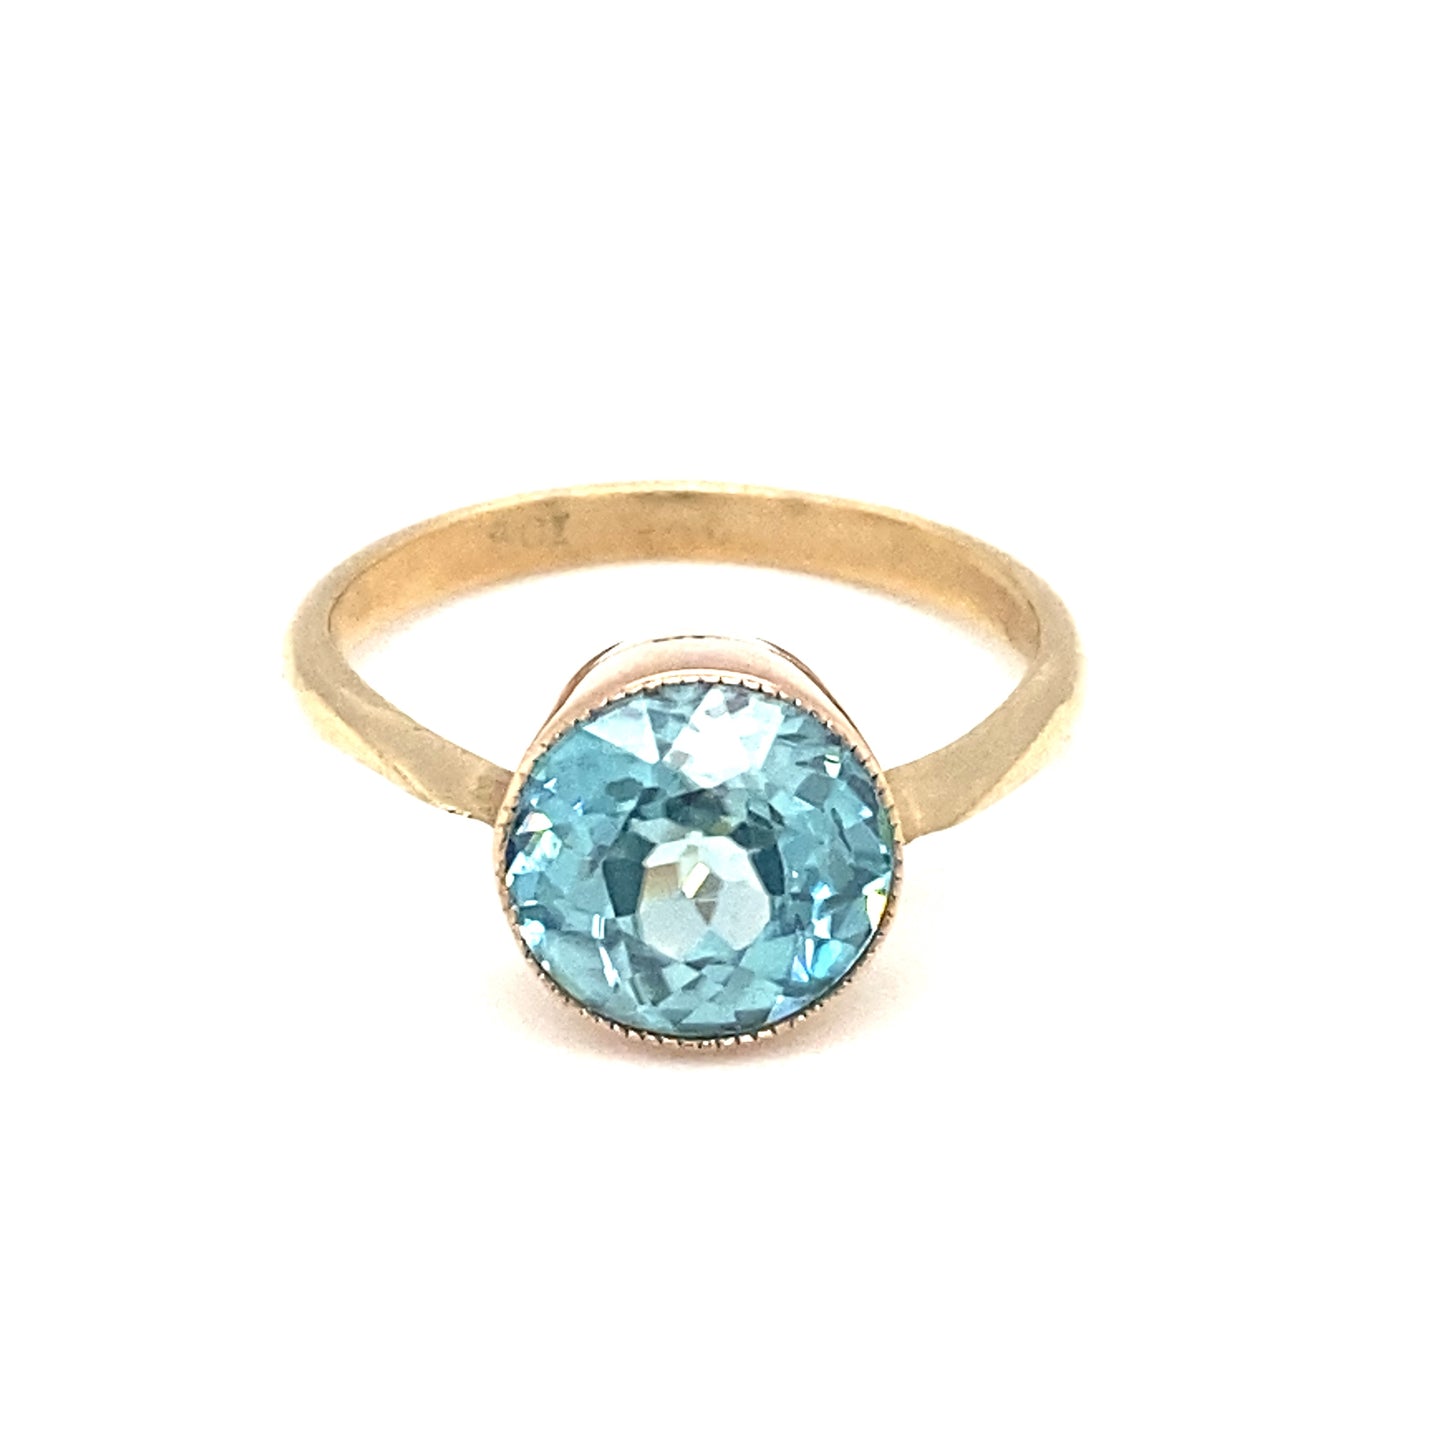 Circa 1890s Victorian 2.0ct Blue Zircon Solitaire Ring in 9K Gold